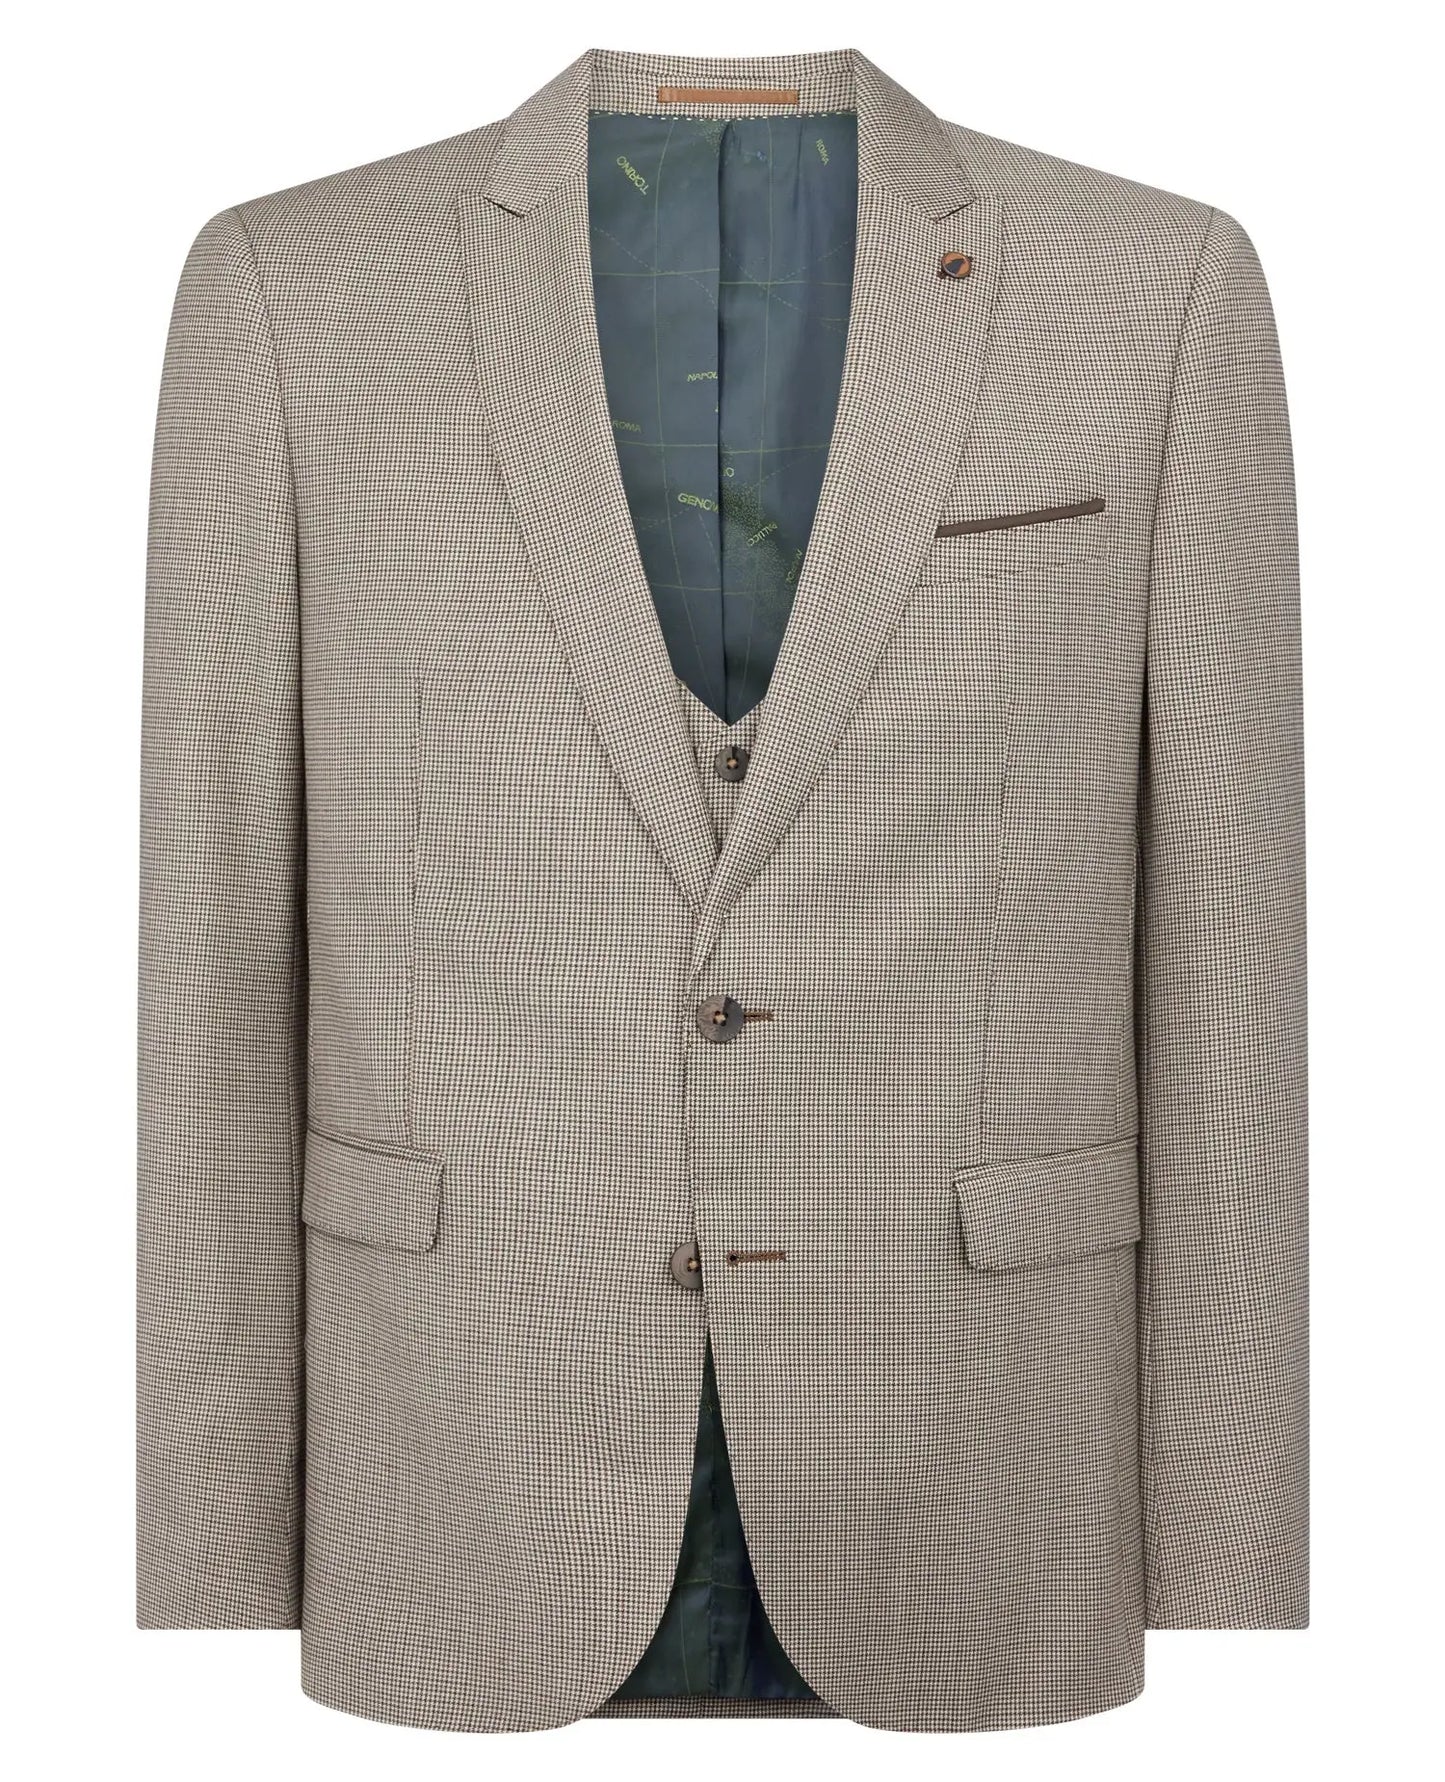 Remus Uomo Mario Micro Houndstooth Suit Jacket - Beige From Woven Durham